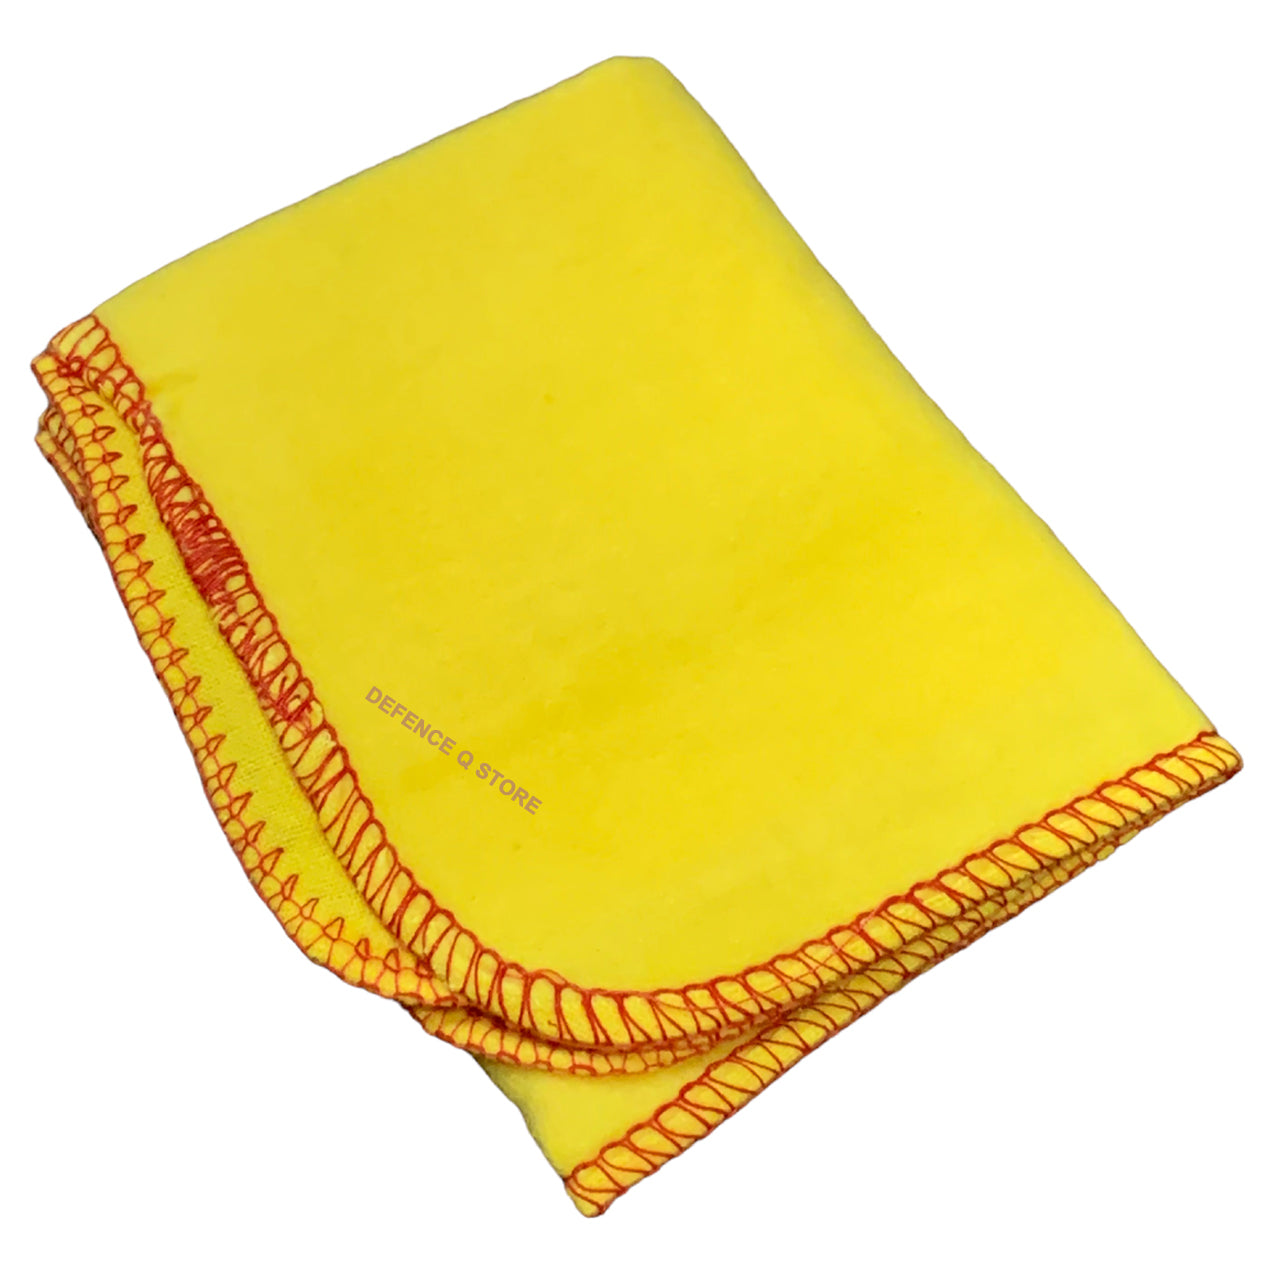 Experience the incredible quality of our Brass &amp; Shoe Polishing Cloth Yellow. Crafted from luxurious brushed cotton and specially treated for optimal results, this cloth will elevate the shine of your brass and shoes to new heights. Size: 380mmx395mm www.defenceqstore.com.au